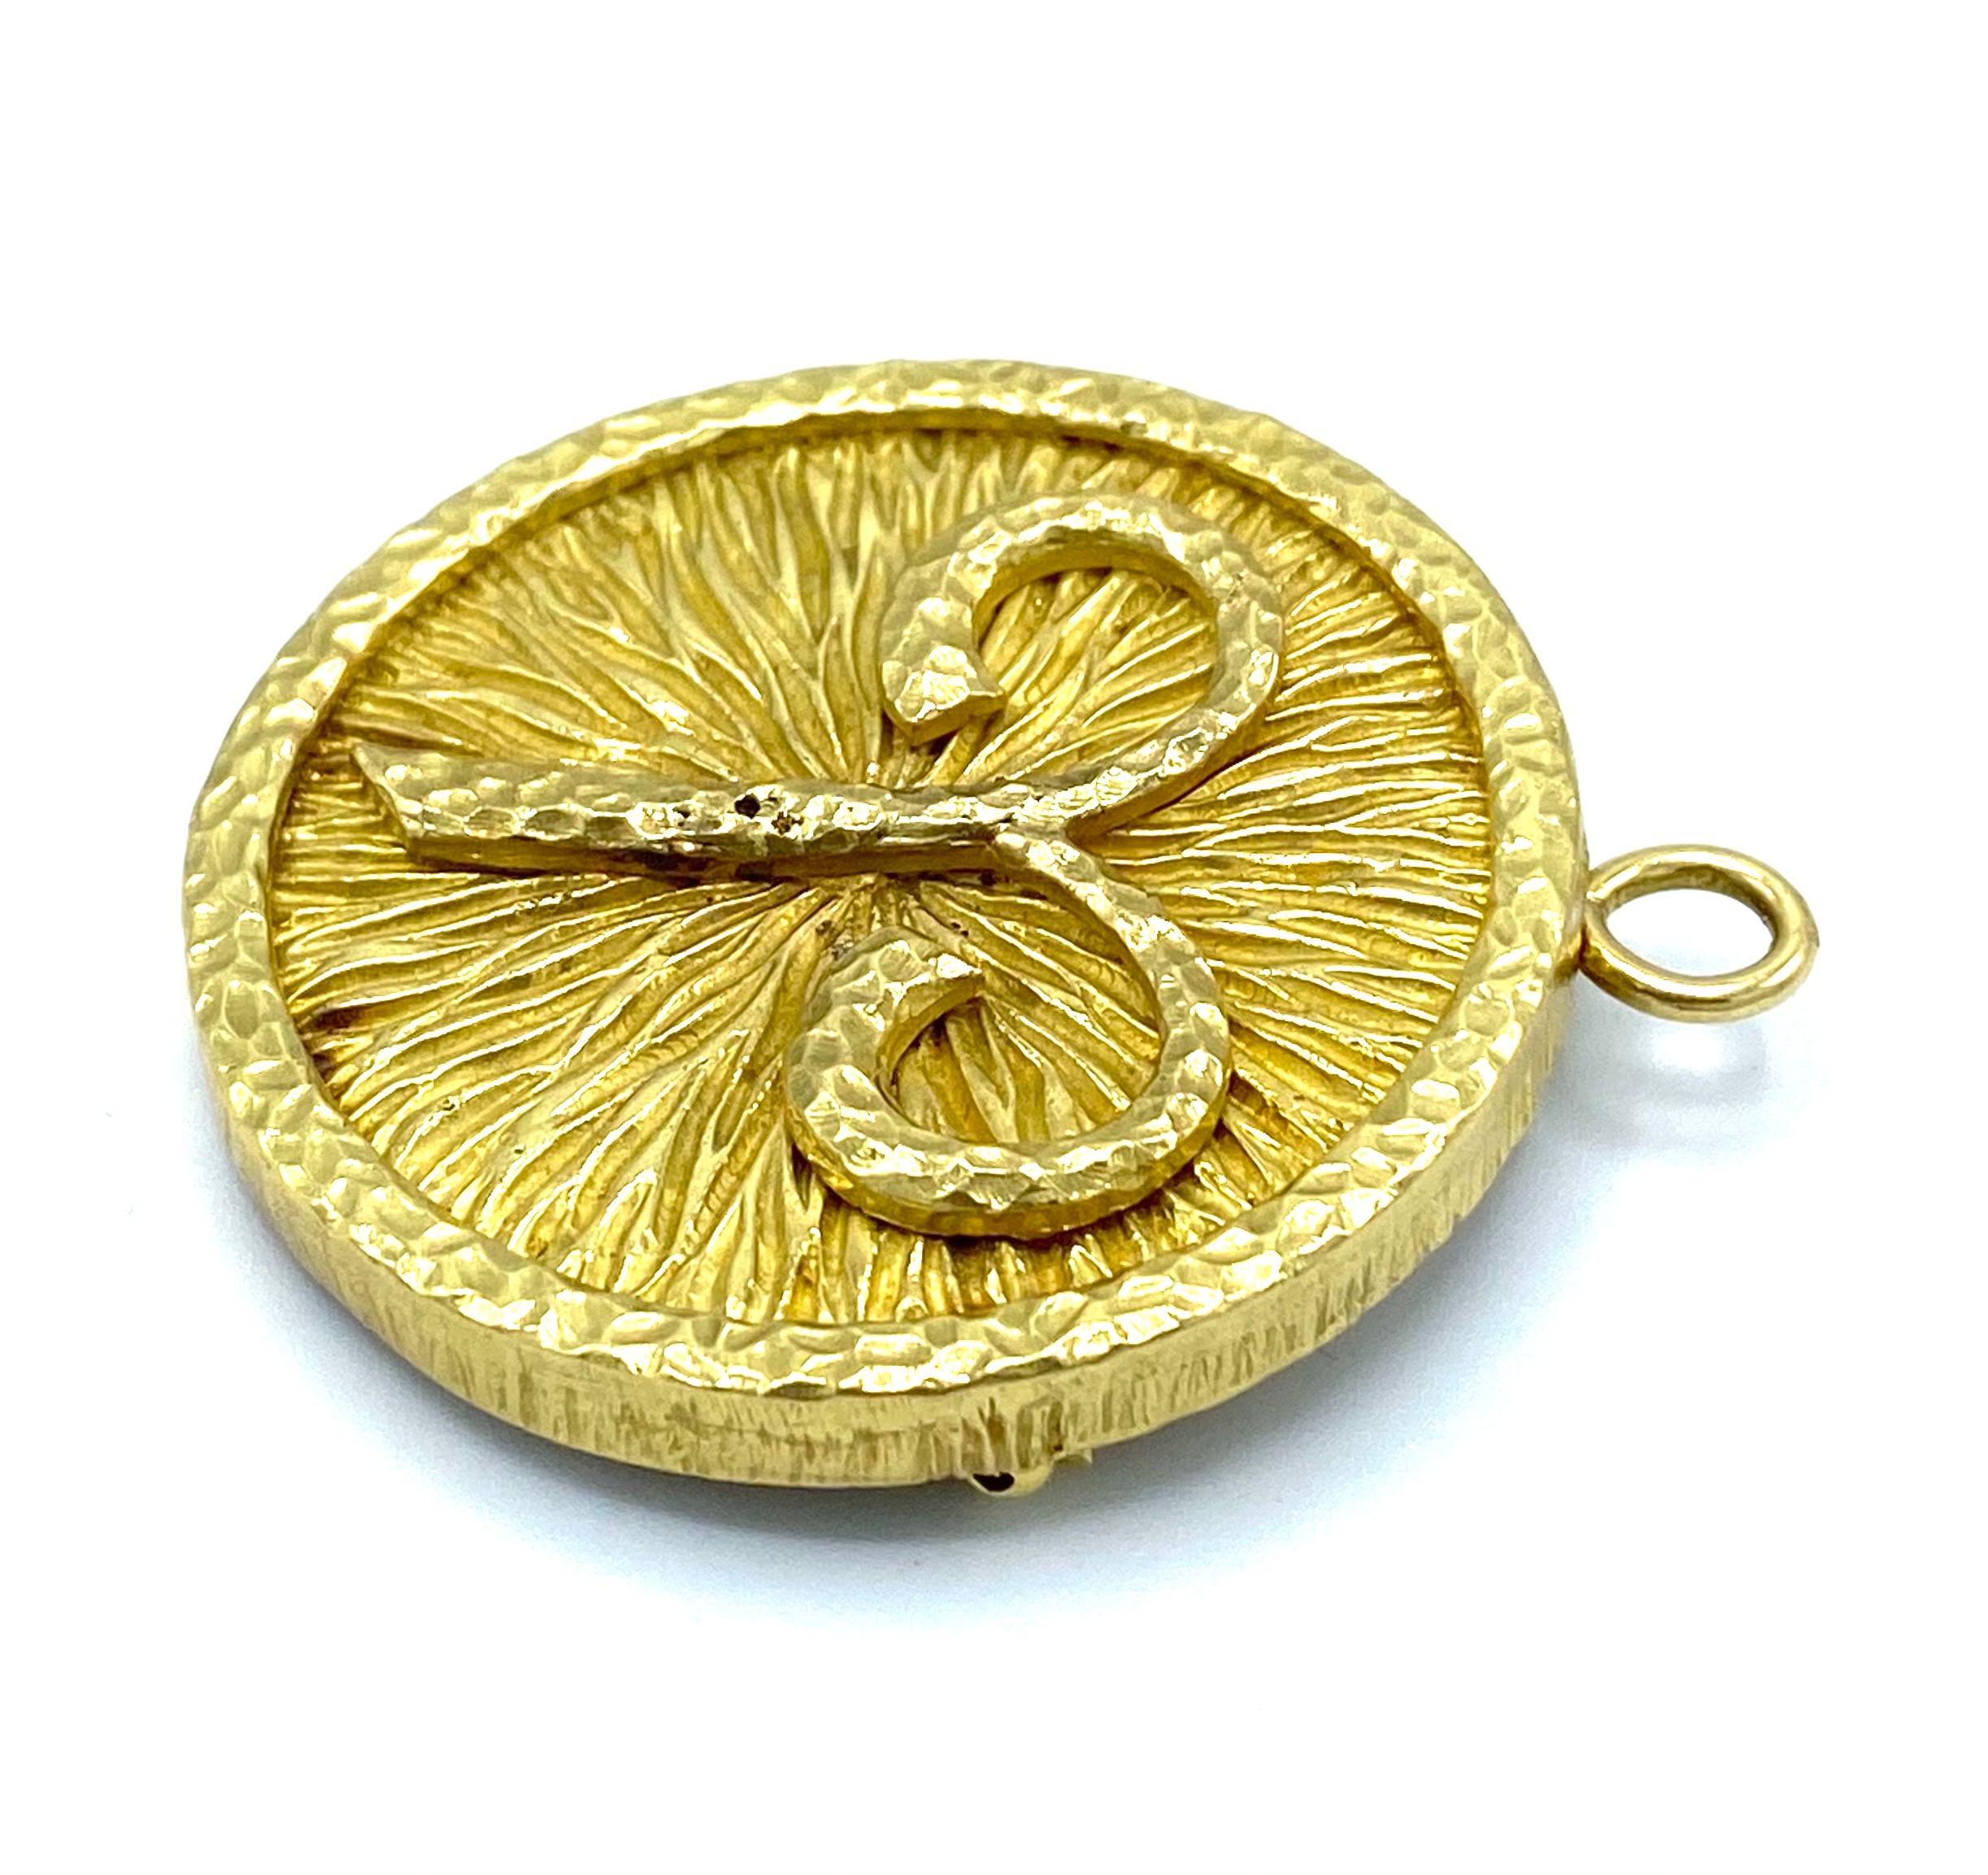 Product details:

The pendant is designed by David Webb, it is made out of 18 karat yellow gold. The pendant features hammered and textured gold finish with astrological sign Aries. The bail folds back for when you want to use it as a brooch. It is